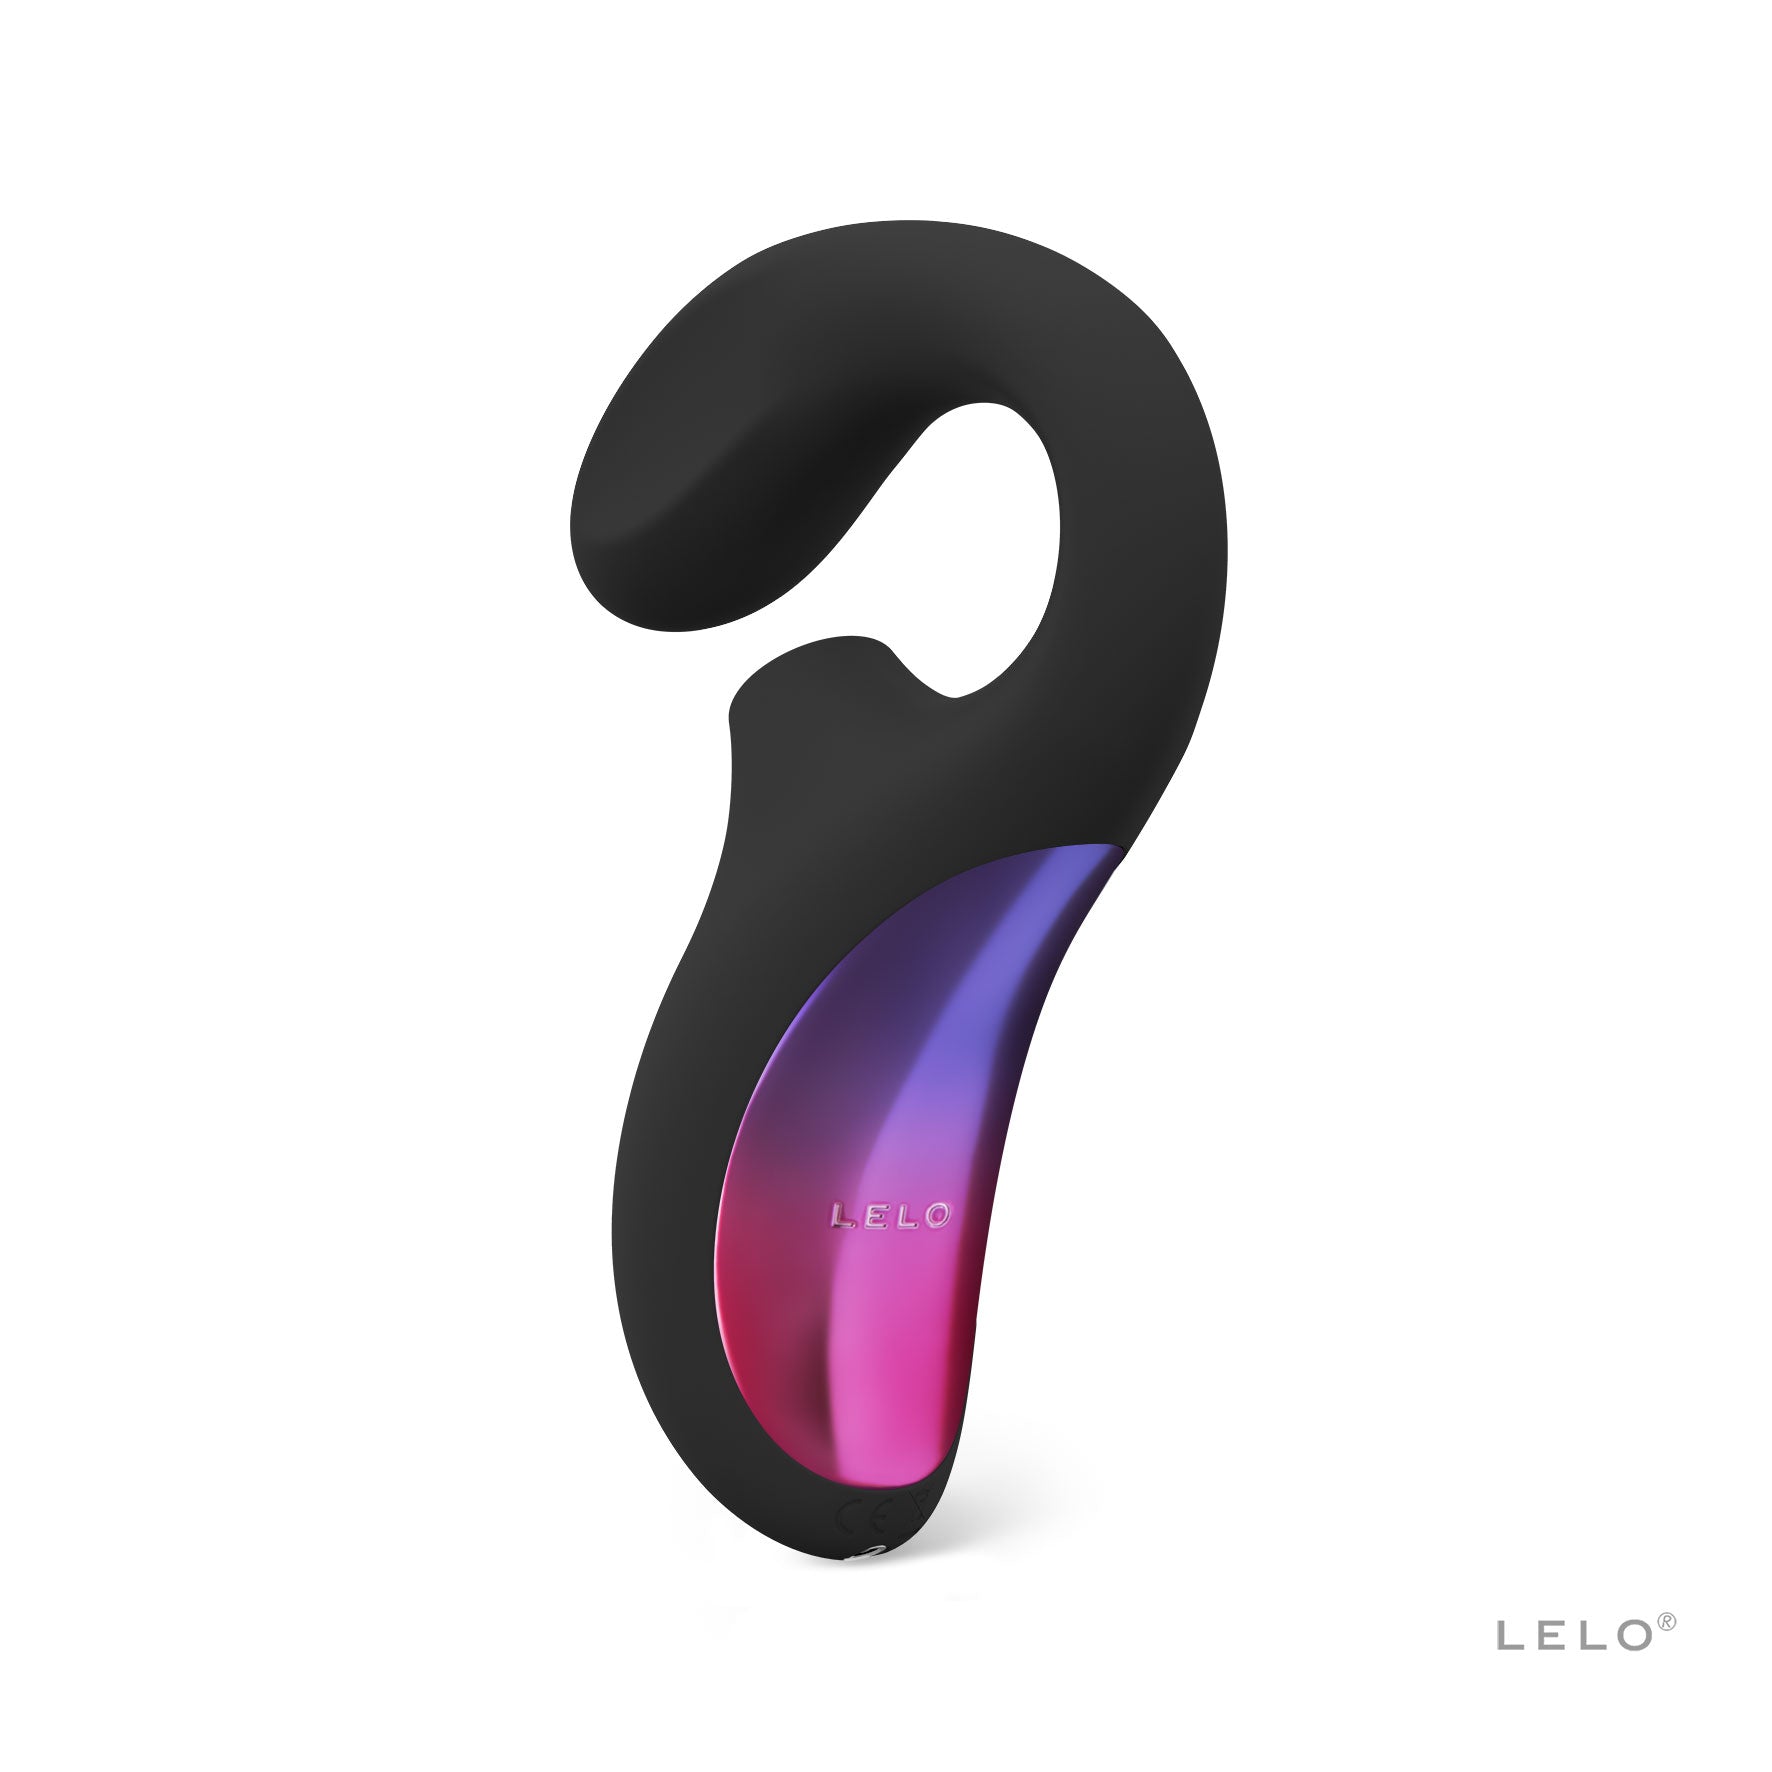 LELO Enigma - The Bigger O - online sex toy shop USA, Canada & UK shipping available